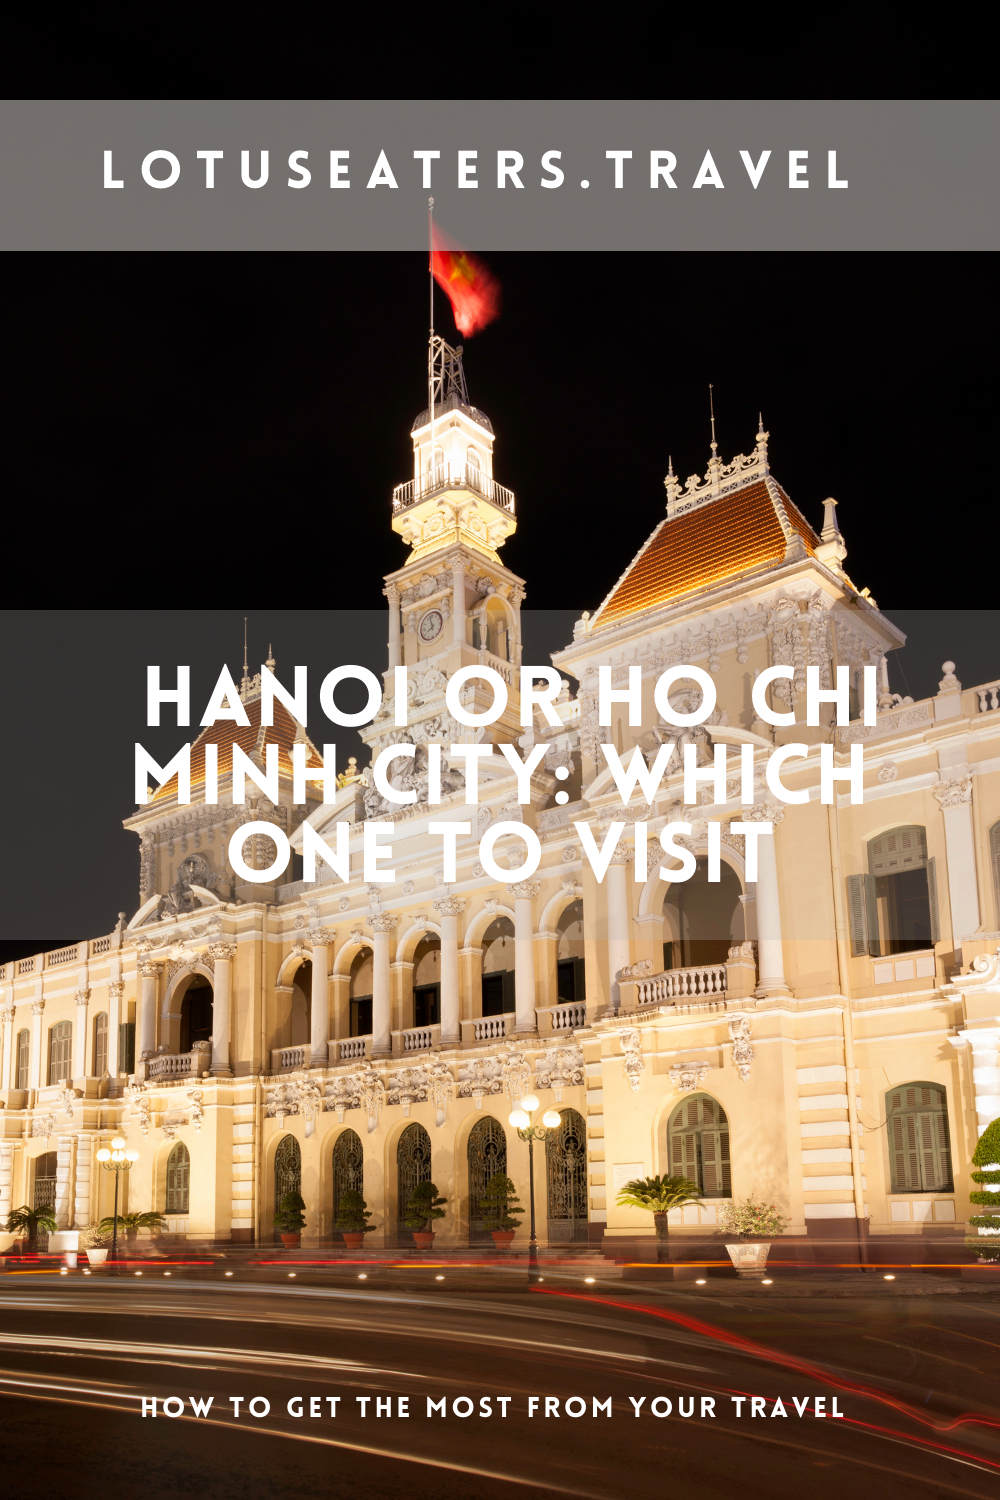 Hanoi versus Ho Chi Minh City, which one to visit?